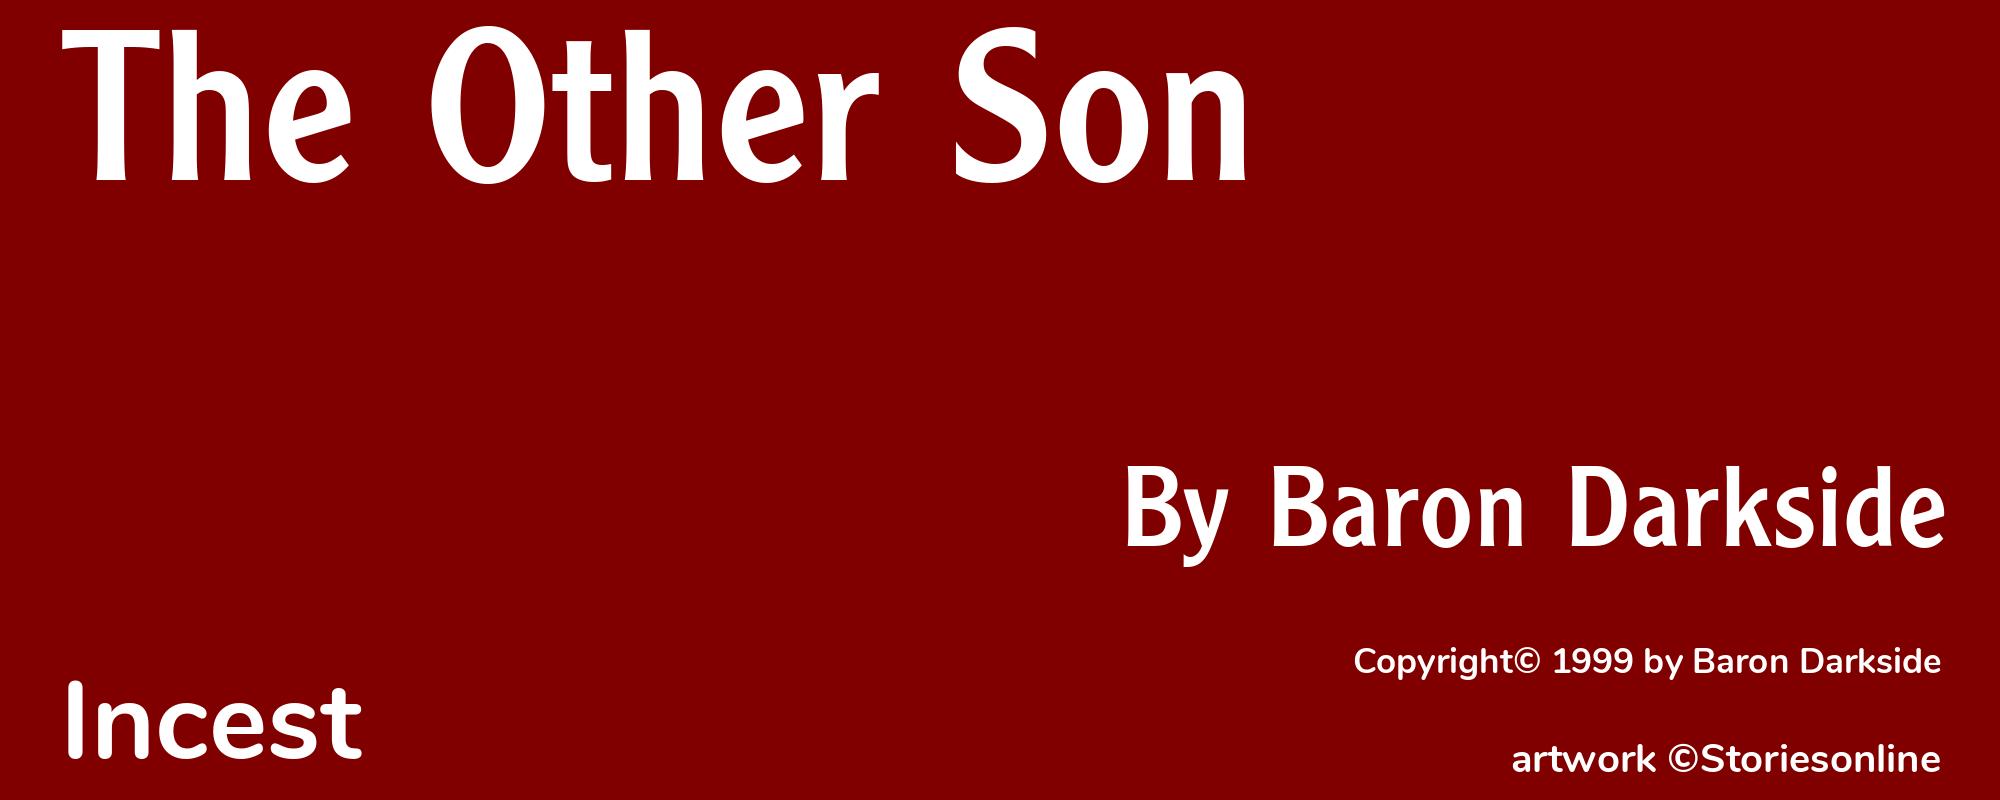 The Other Son - Cover